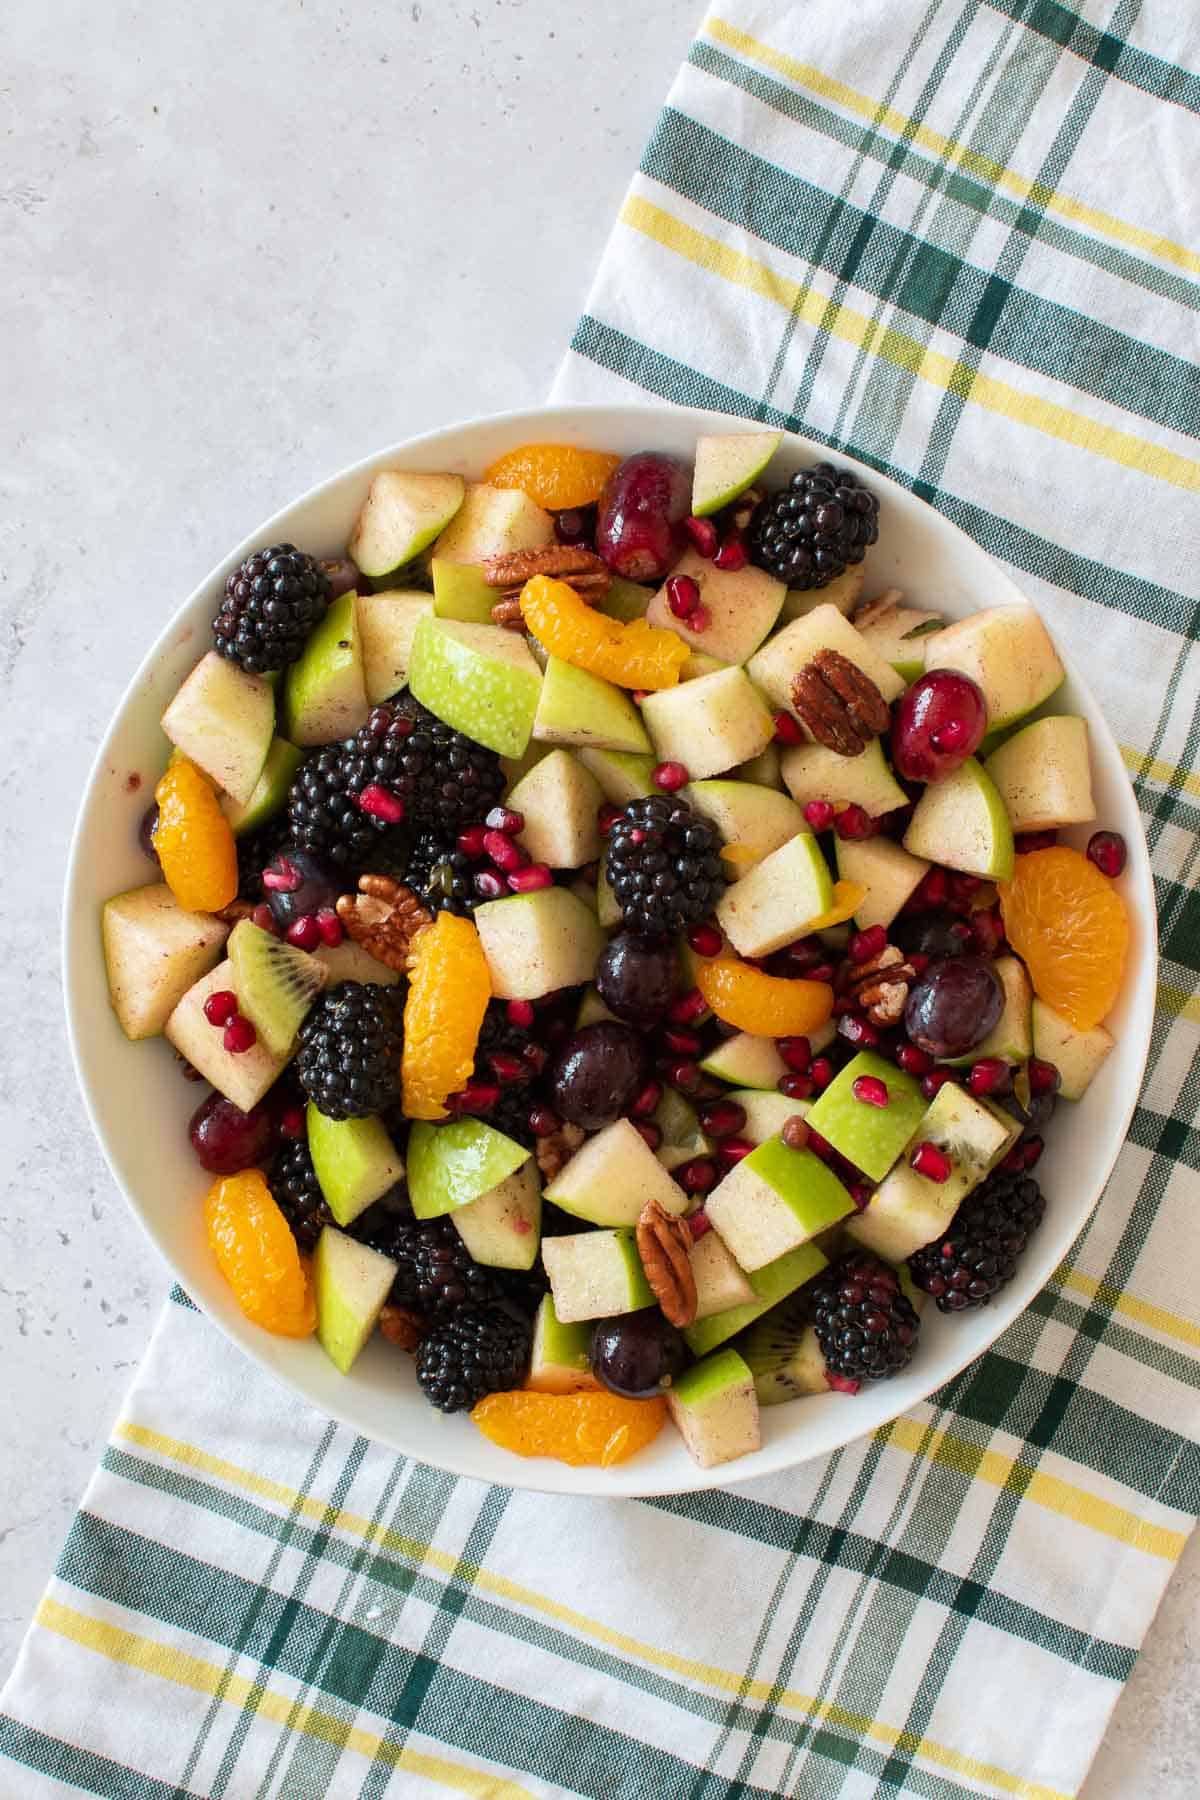 Mixed fruit salad with pecans, apples, berries and pomegranate.